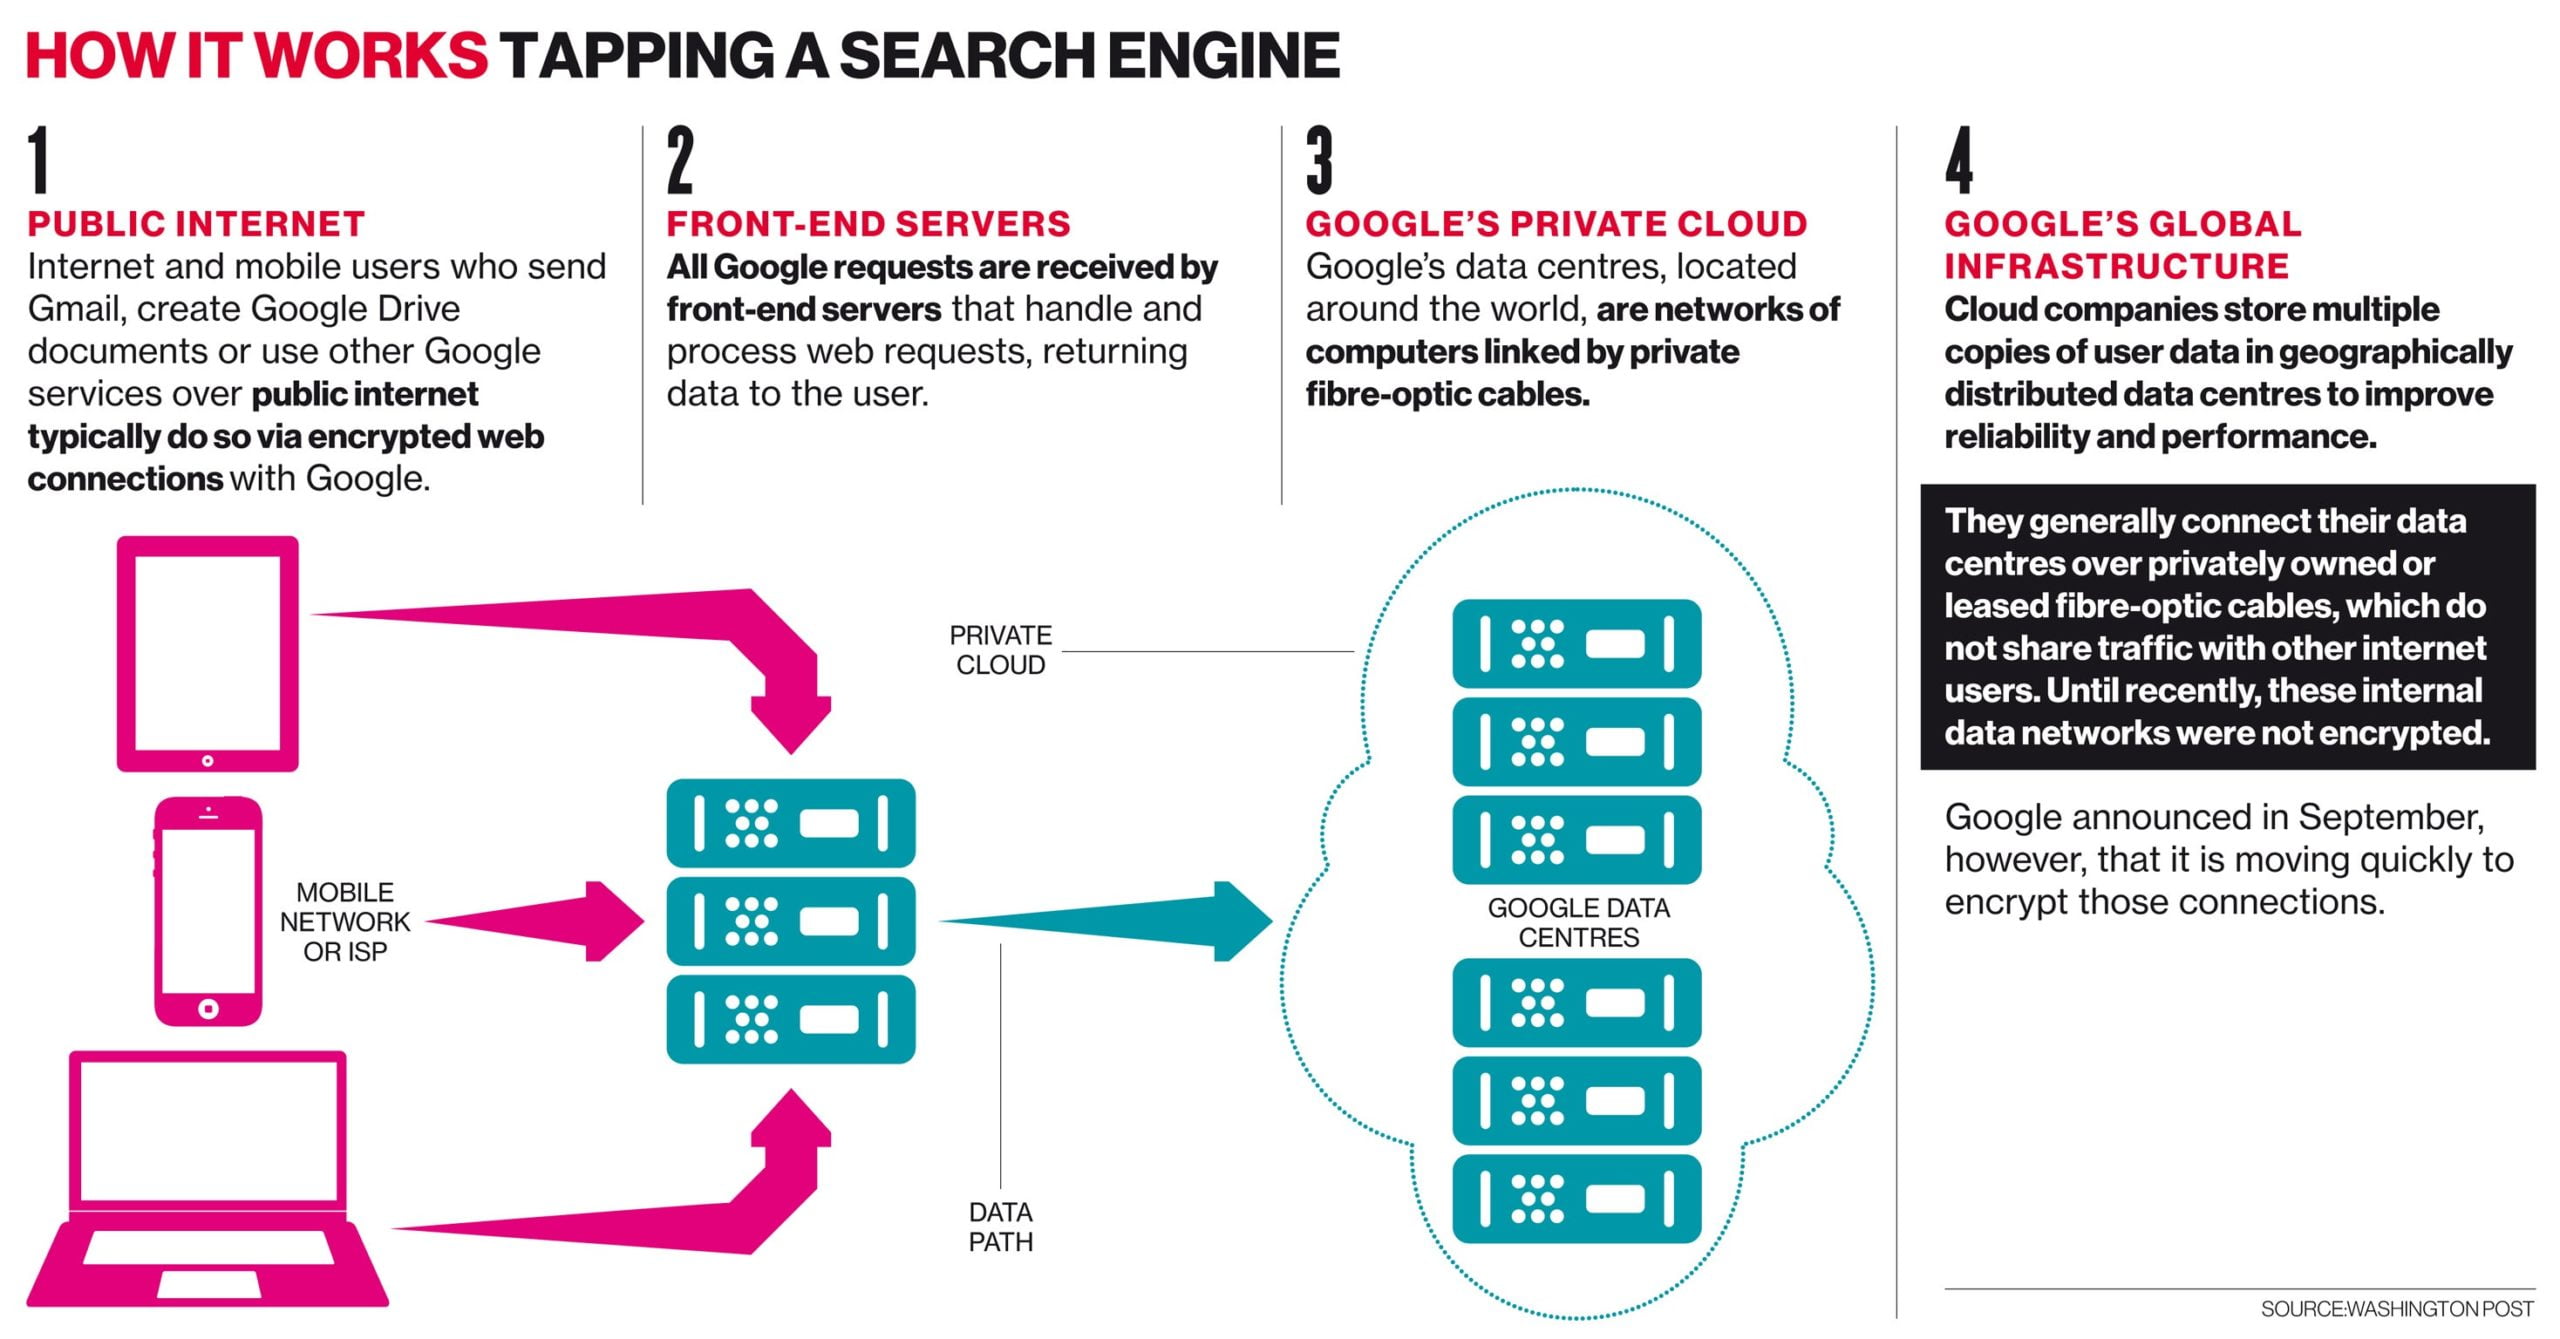 Tapping a search engine